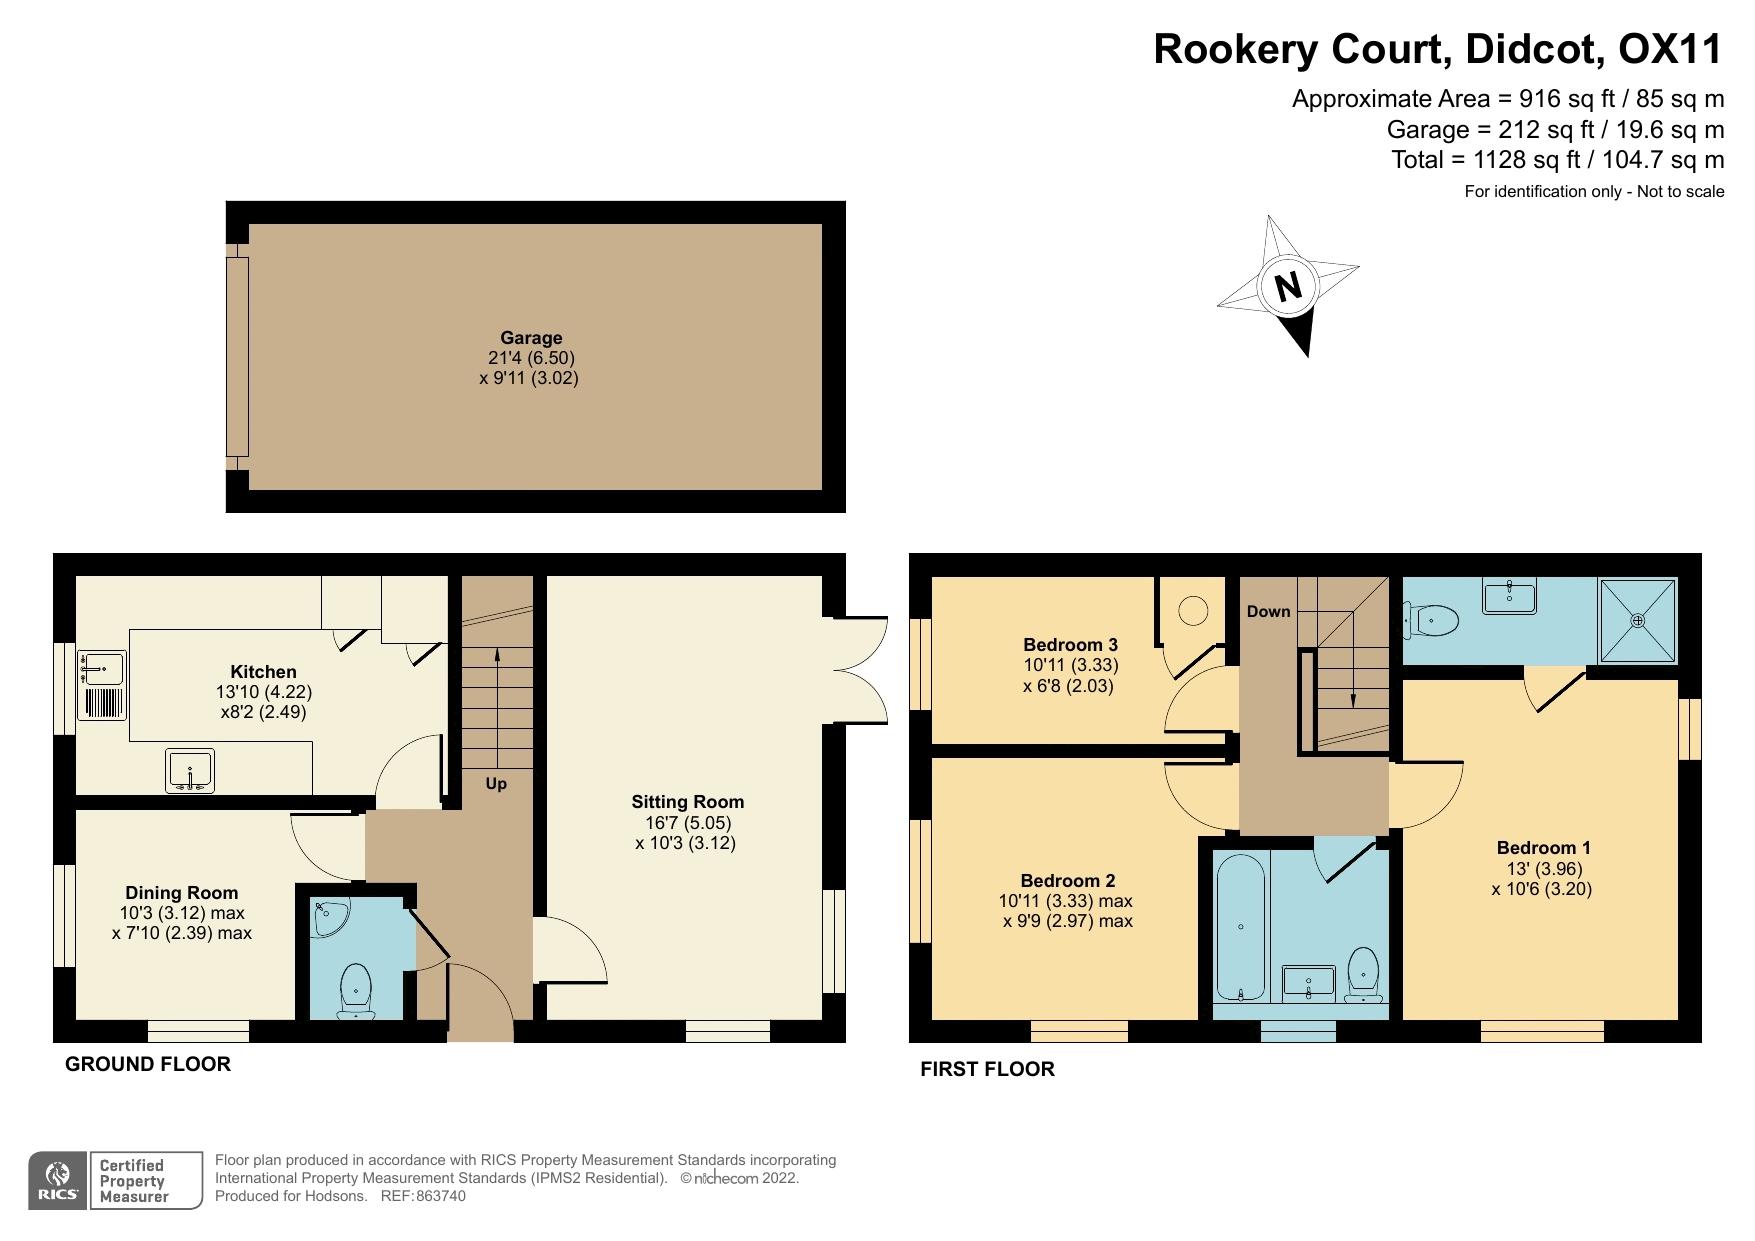 Rookery Court